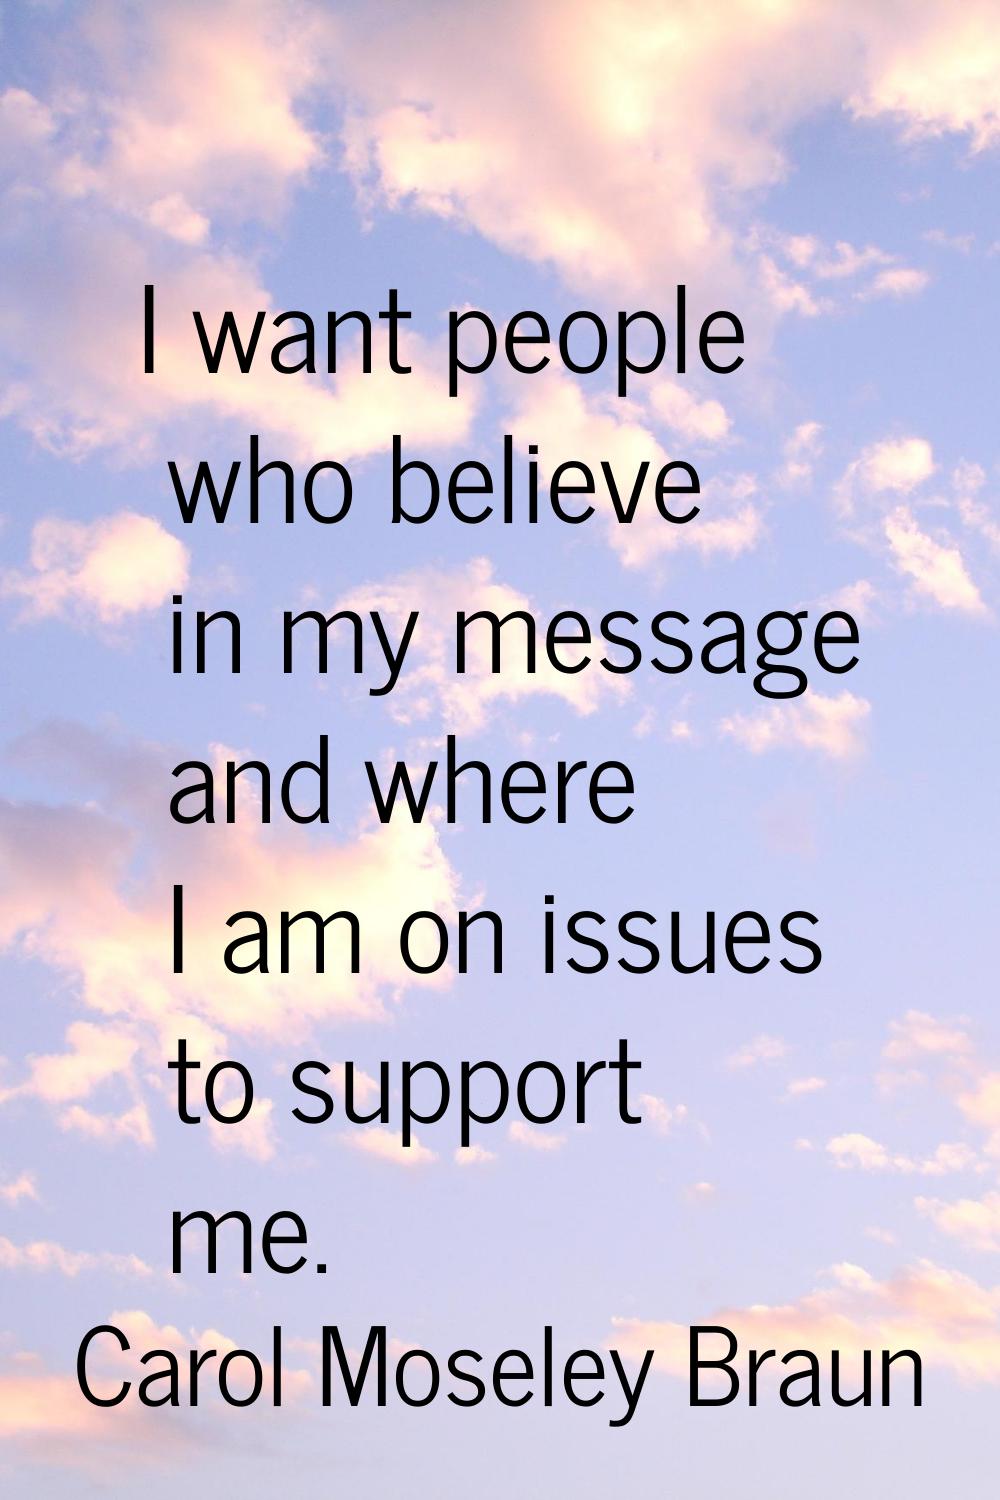 I want people who believe in my message and where I am on issues to support me.